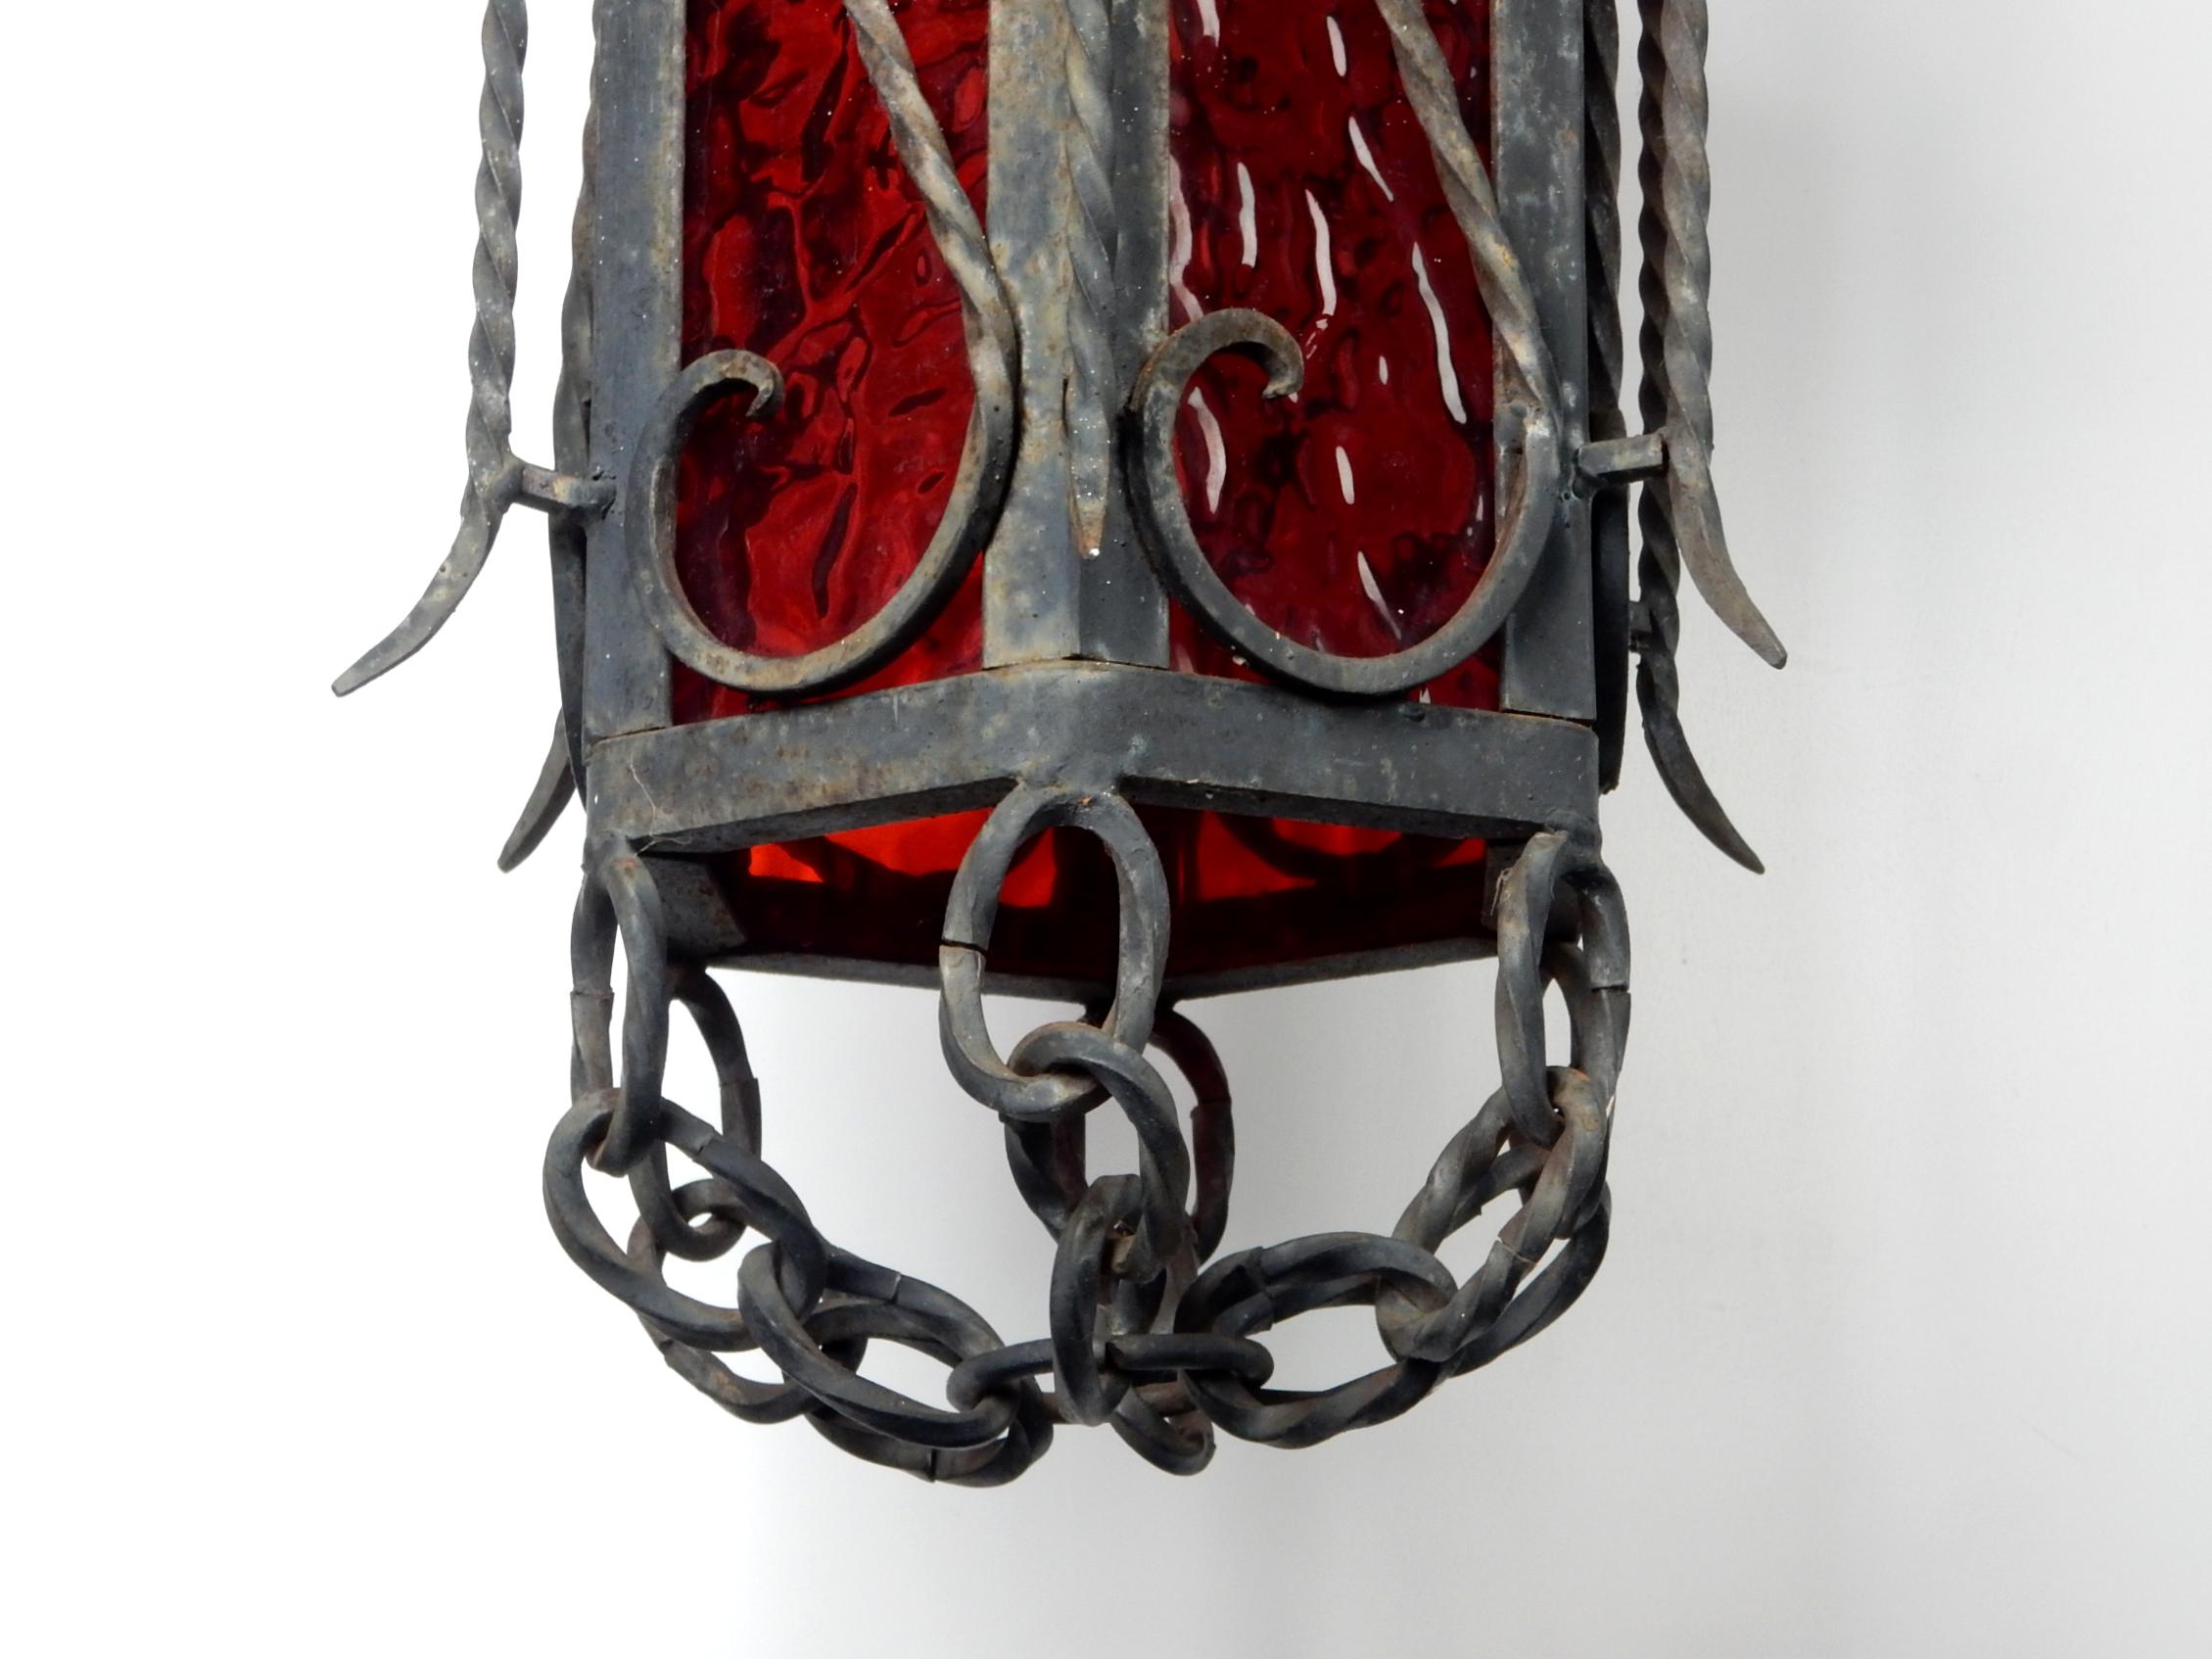 California Craftsman Iron Ornate Sconces Pendant Lamps with Ruby Red Glass, Pair In Fair Condition For Sale In Las Vegas, NV